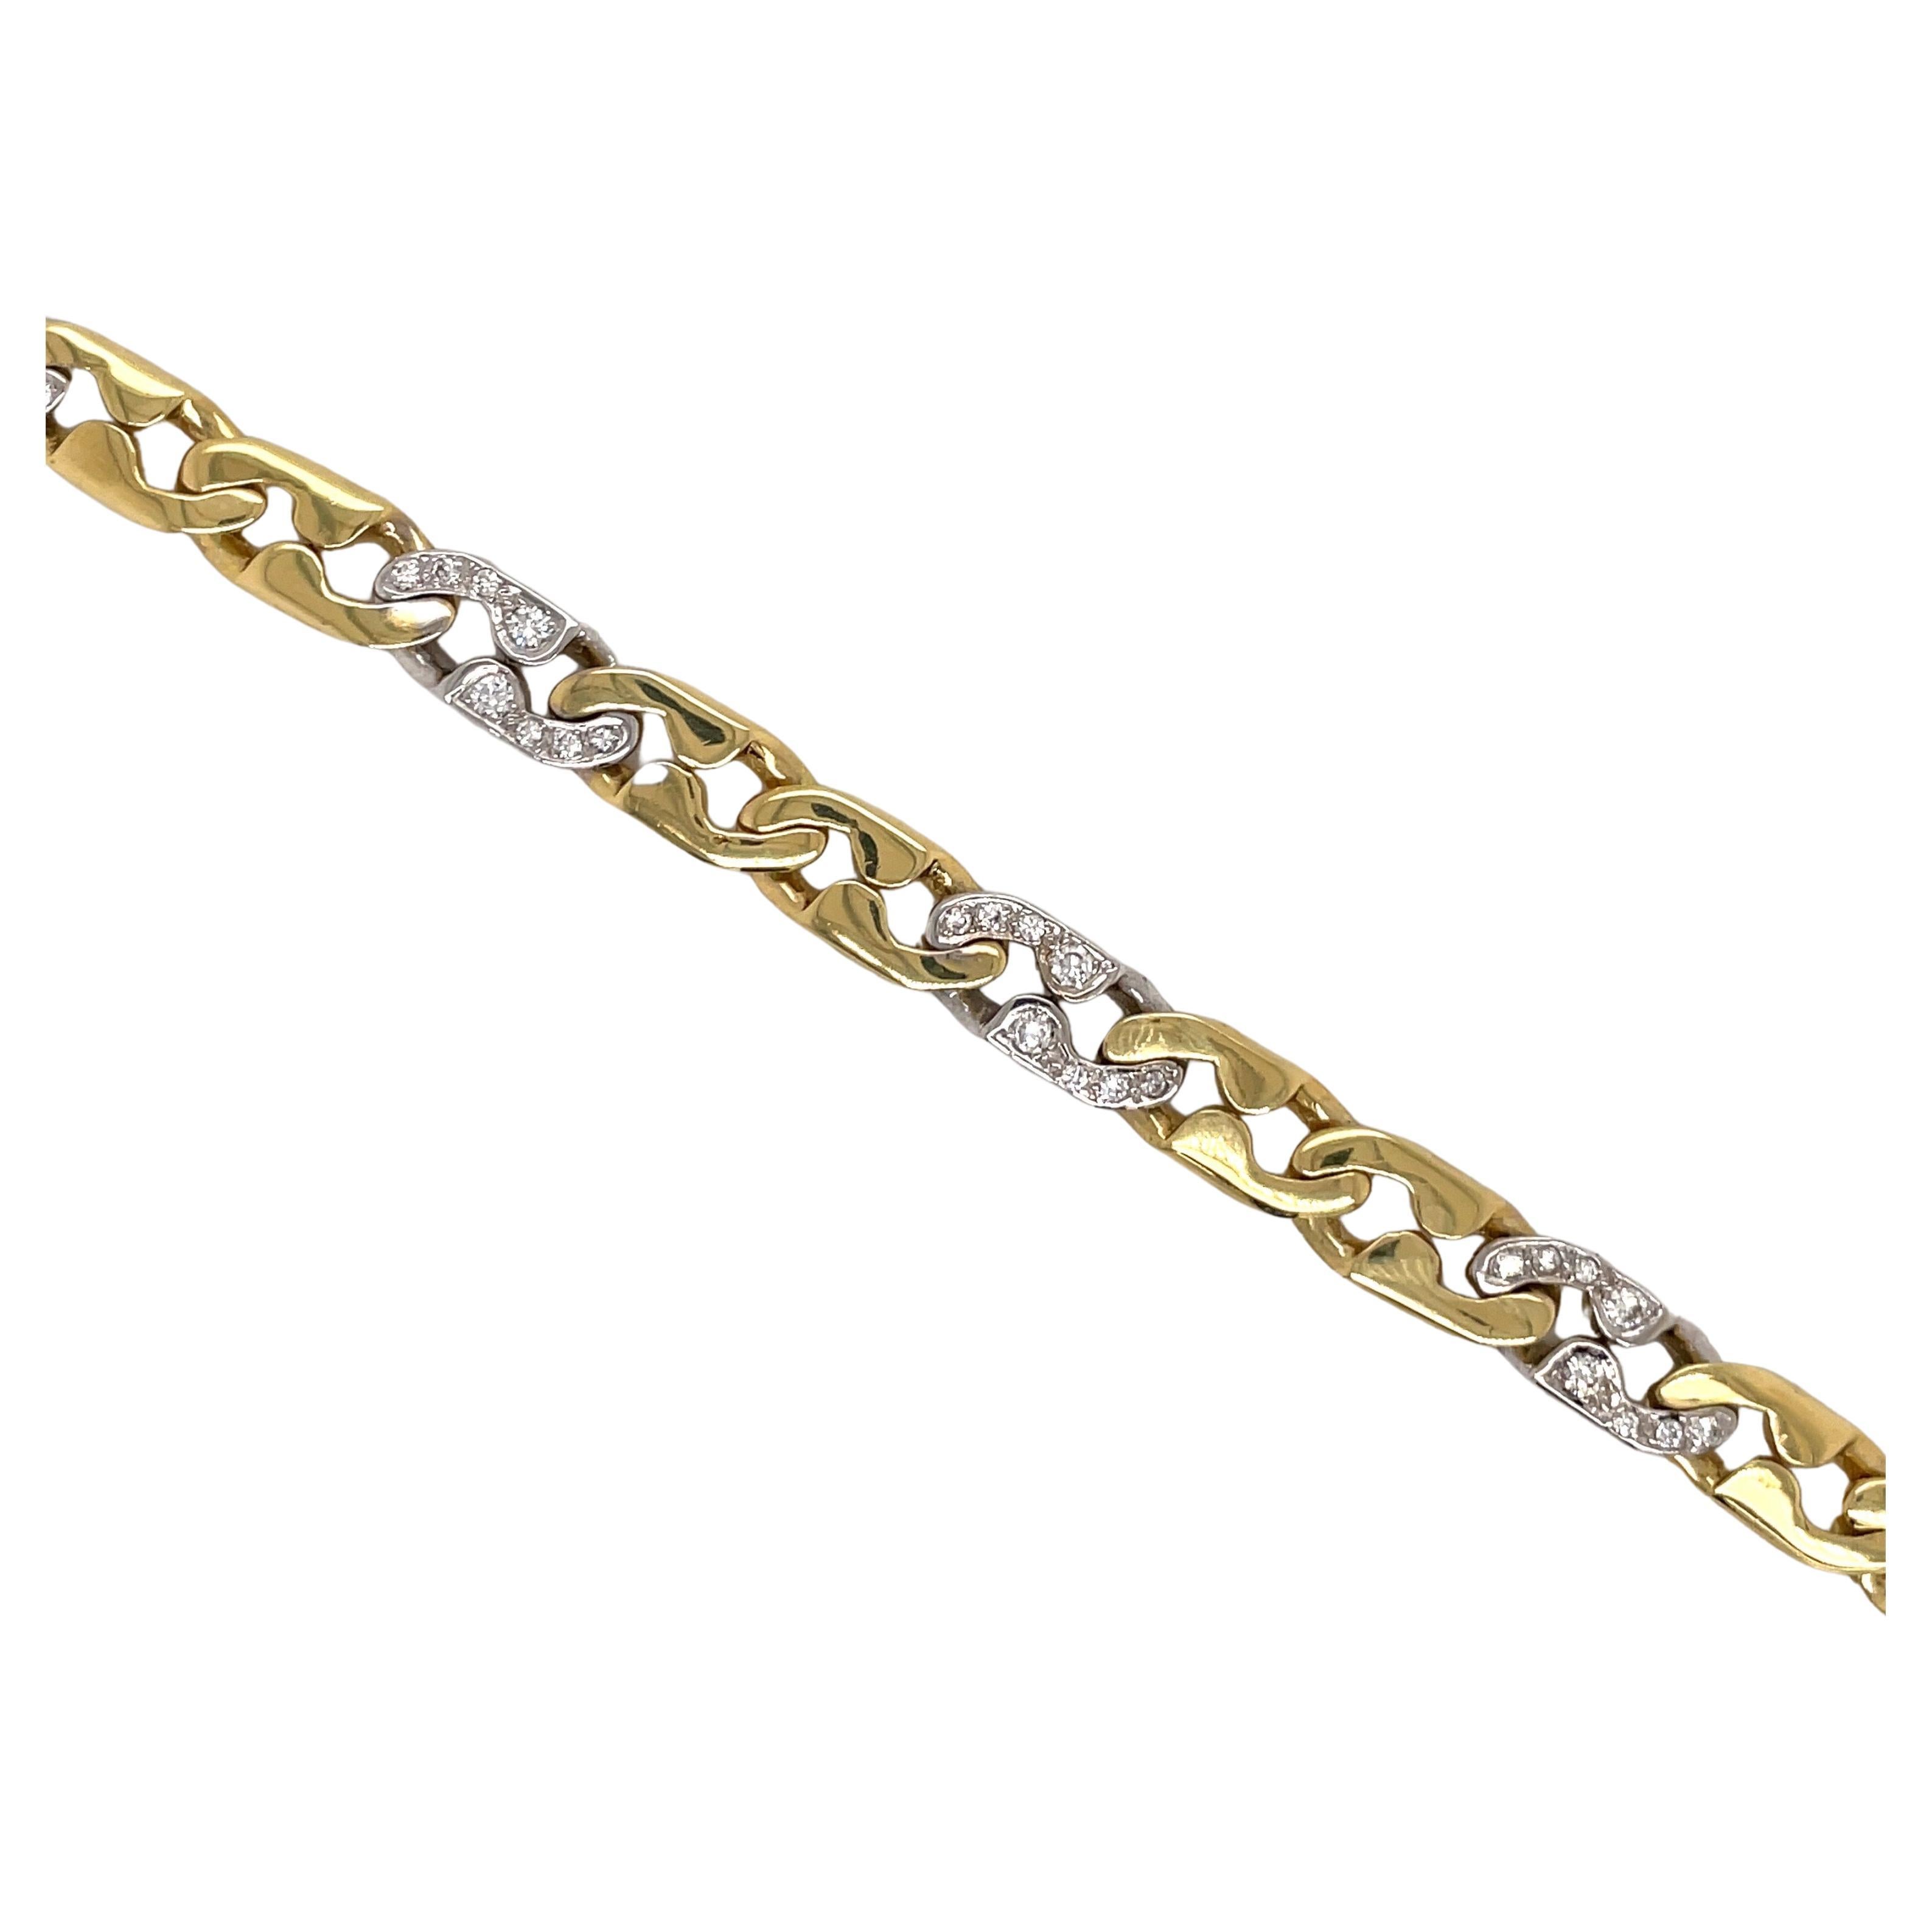 18 Karat Yellow & White gold bracelet featuring 6 diamond links weighing approximately 0.60 carats and 12 high polish links, 25 grams.
Color G-H
Clarity SI